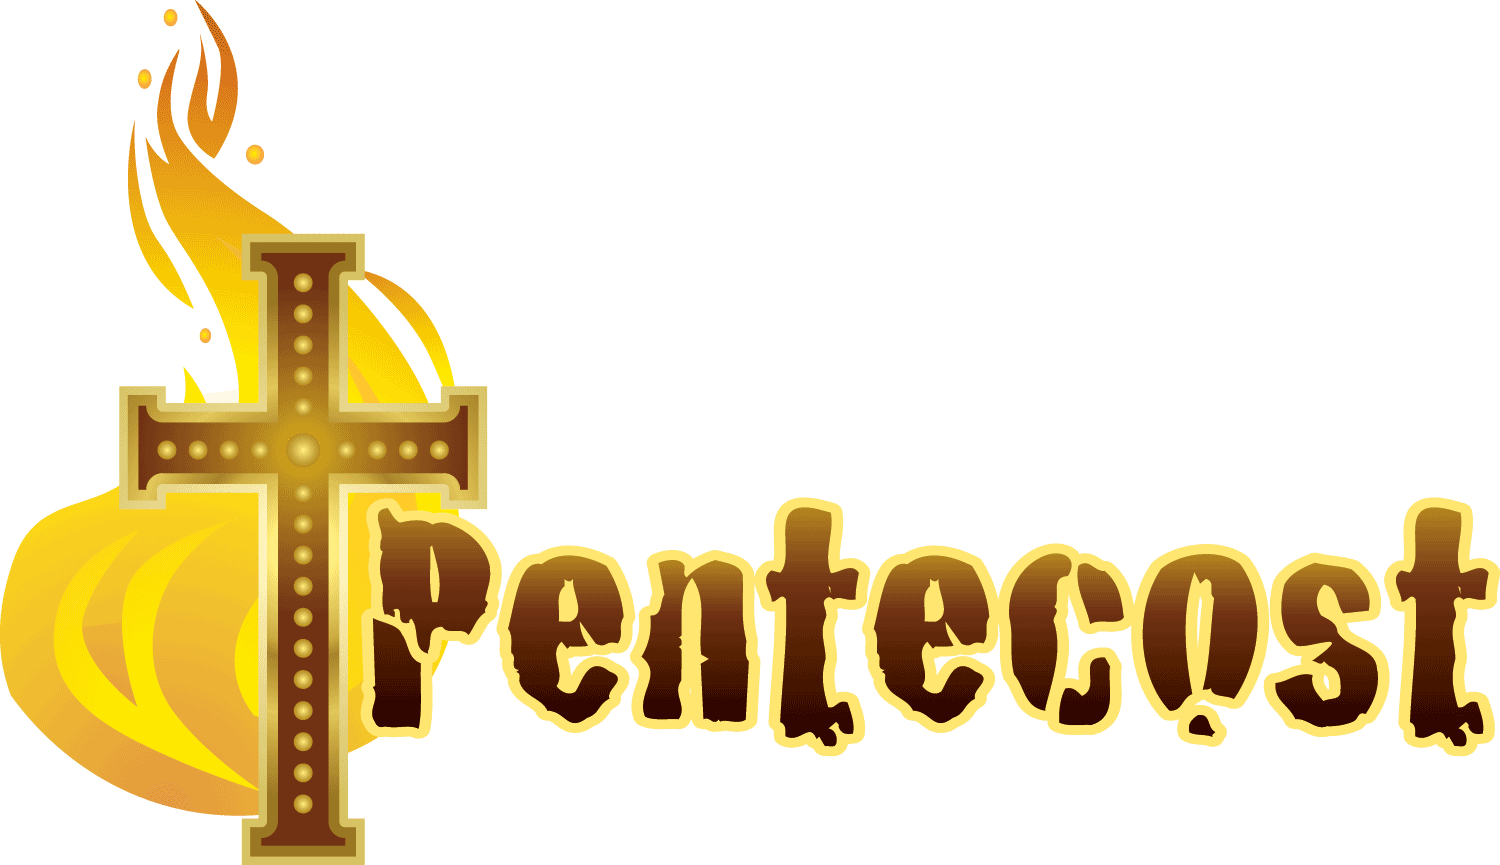 Pentecost - occurs 49 days after Easter, the 7th Sunday after Easter. The day when the Holy Spirit came across the people while they were in Jerusalem. This account is found in Acts 2. #Pentecost